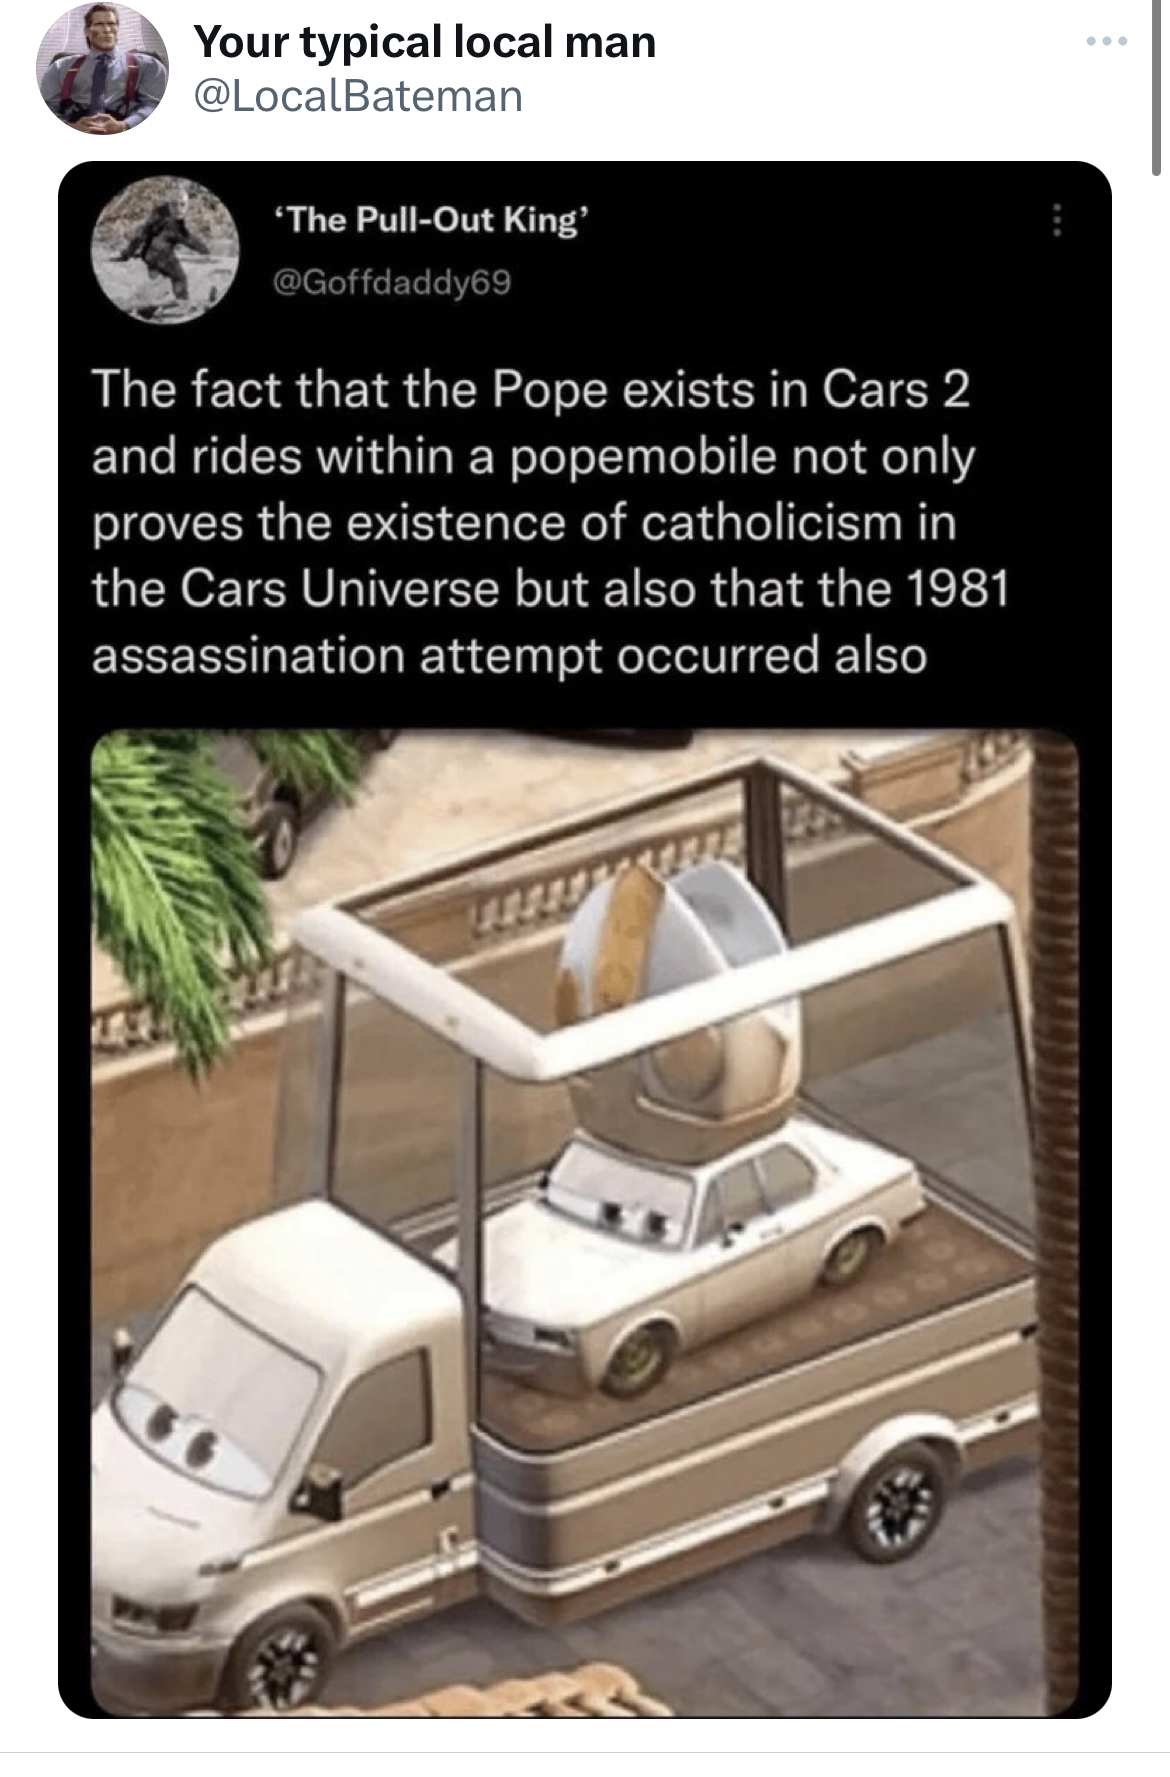 savage tweets - cars 2 pope - Your typical local man 'The PullOut King The fact that the Pope exists in Cars 2 and rides within a popemobile not only proves the existence of catholicism in the Cars Universe but also that the 1981 assassination attempt occ